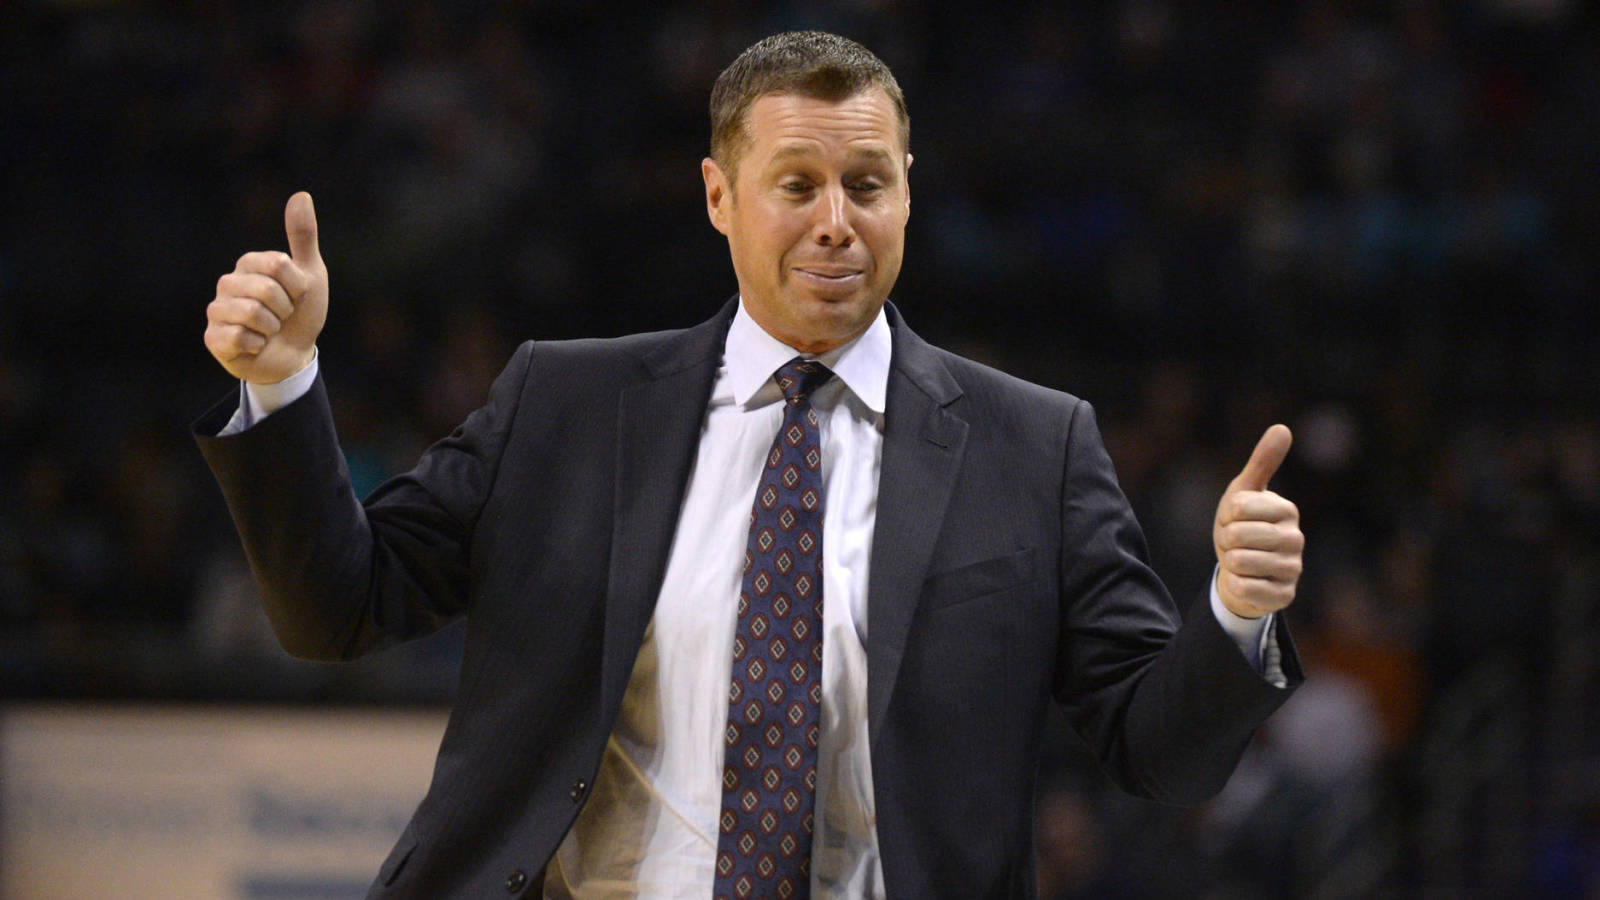 Dave Joerger rumors, news and stories [Top latest 20+ articles]